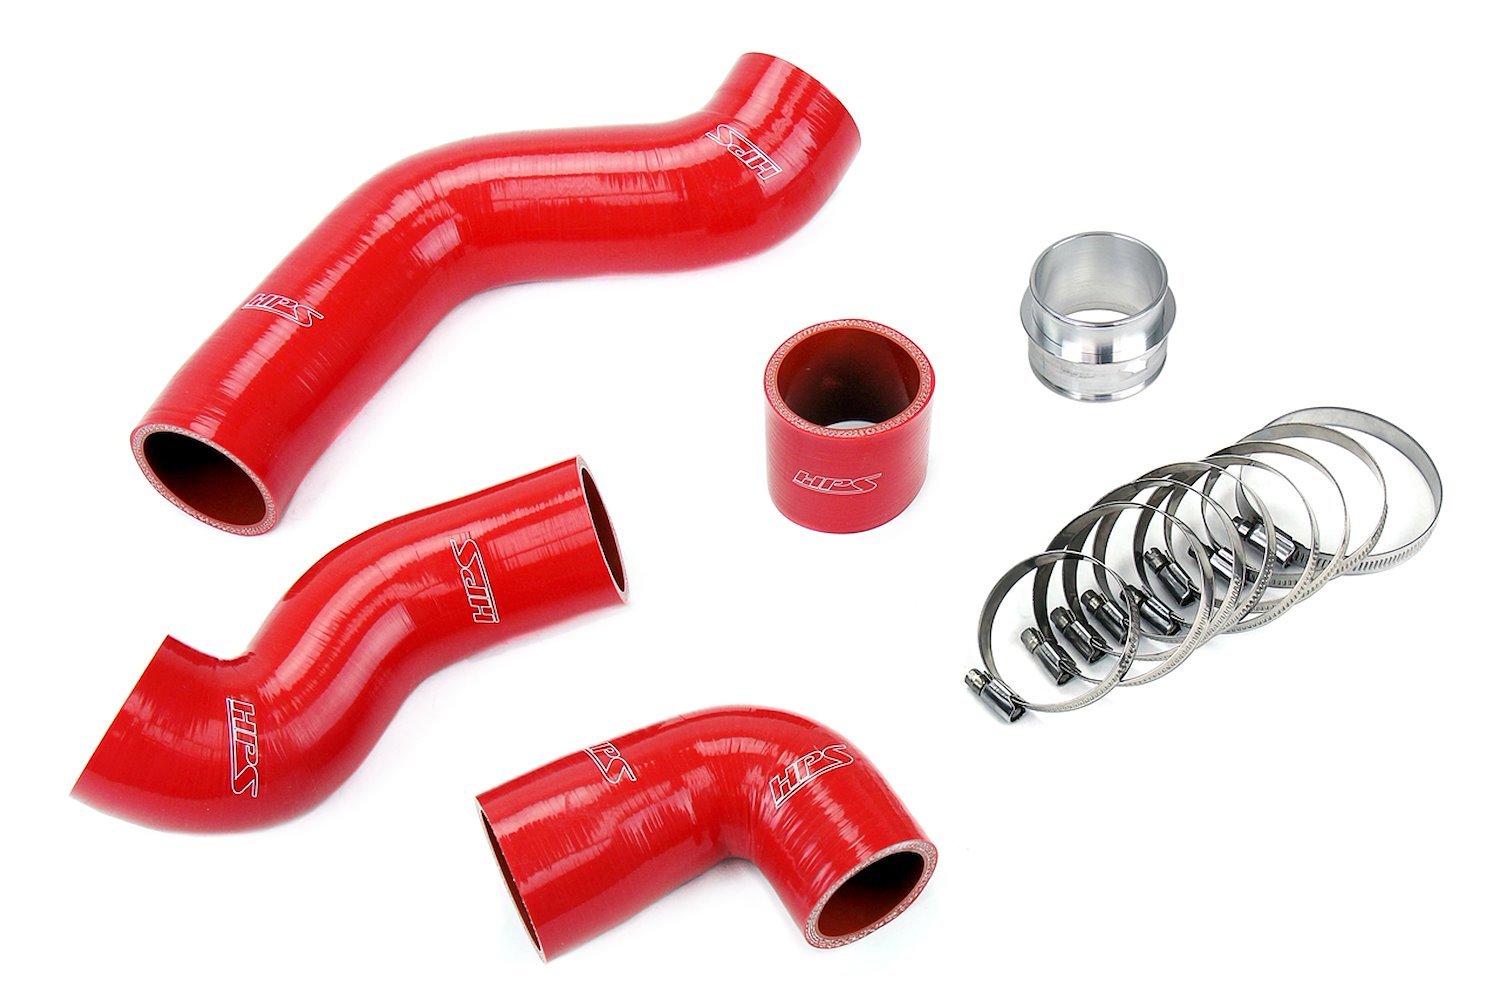 57-1845-RED Intercooler Hose Kit, High-Temp 4-Ply Reinforced Silicone, Replace OEM Rubber Intercooler Turbo Boots